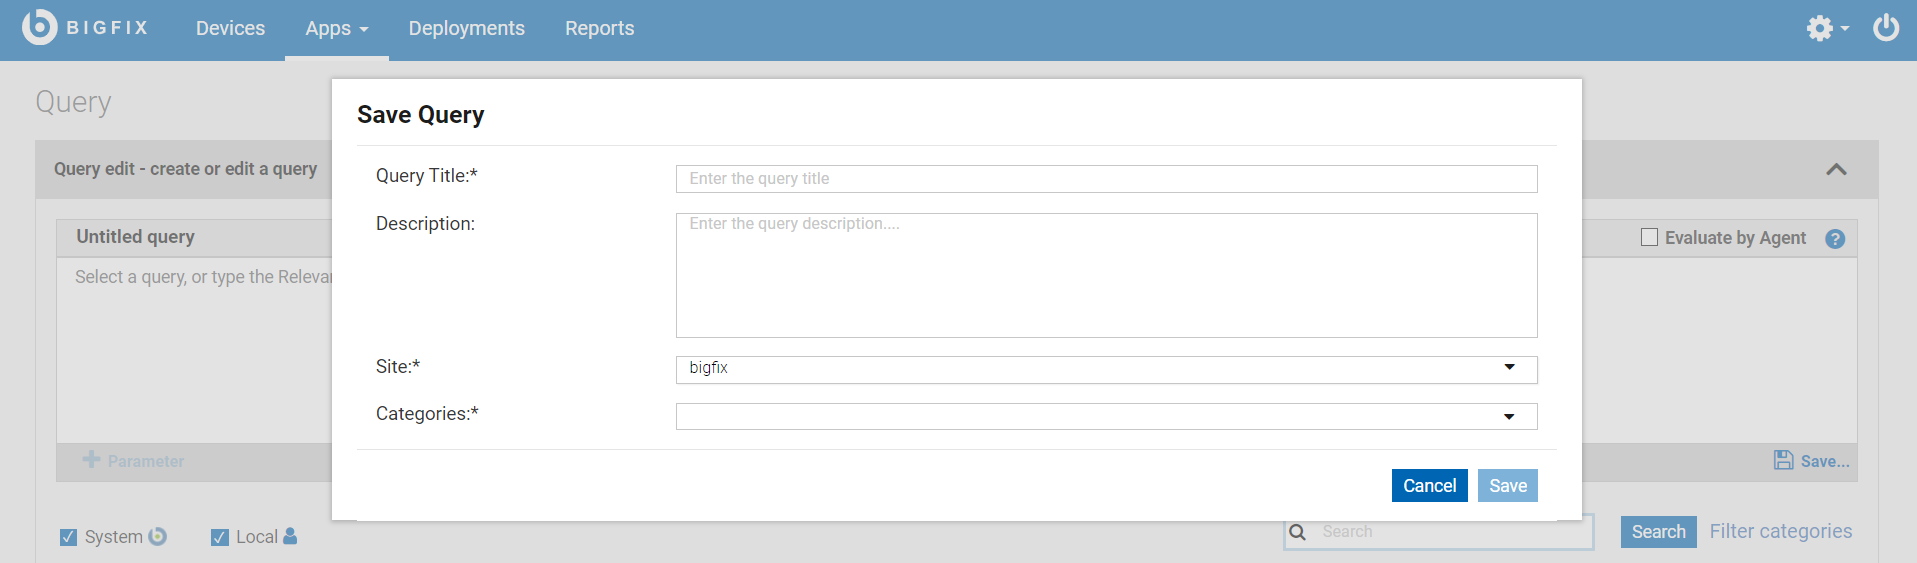 Image of Save Query dialog.